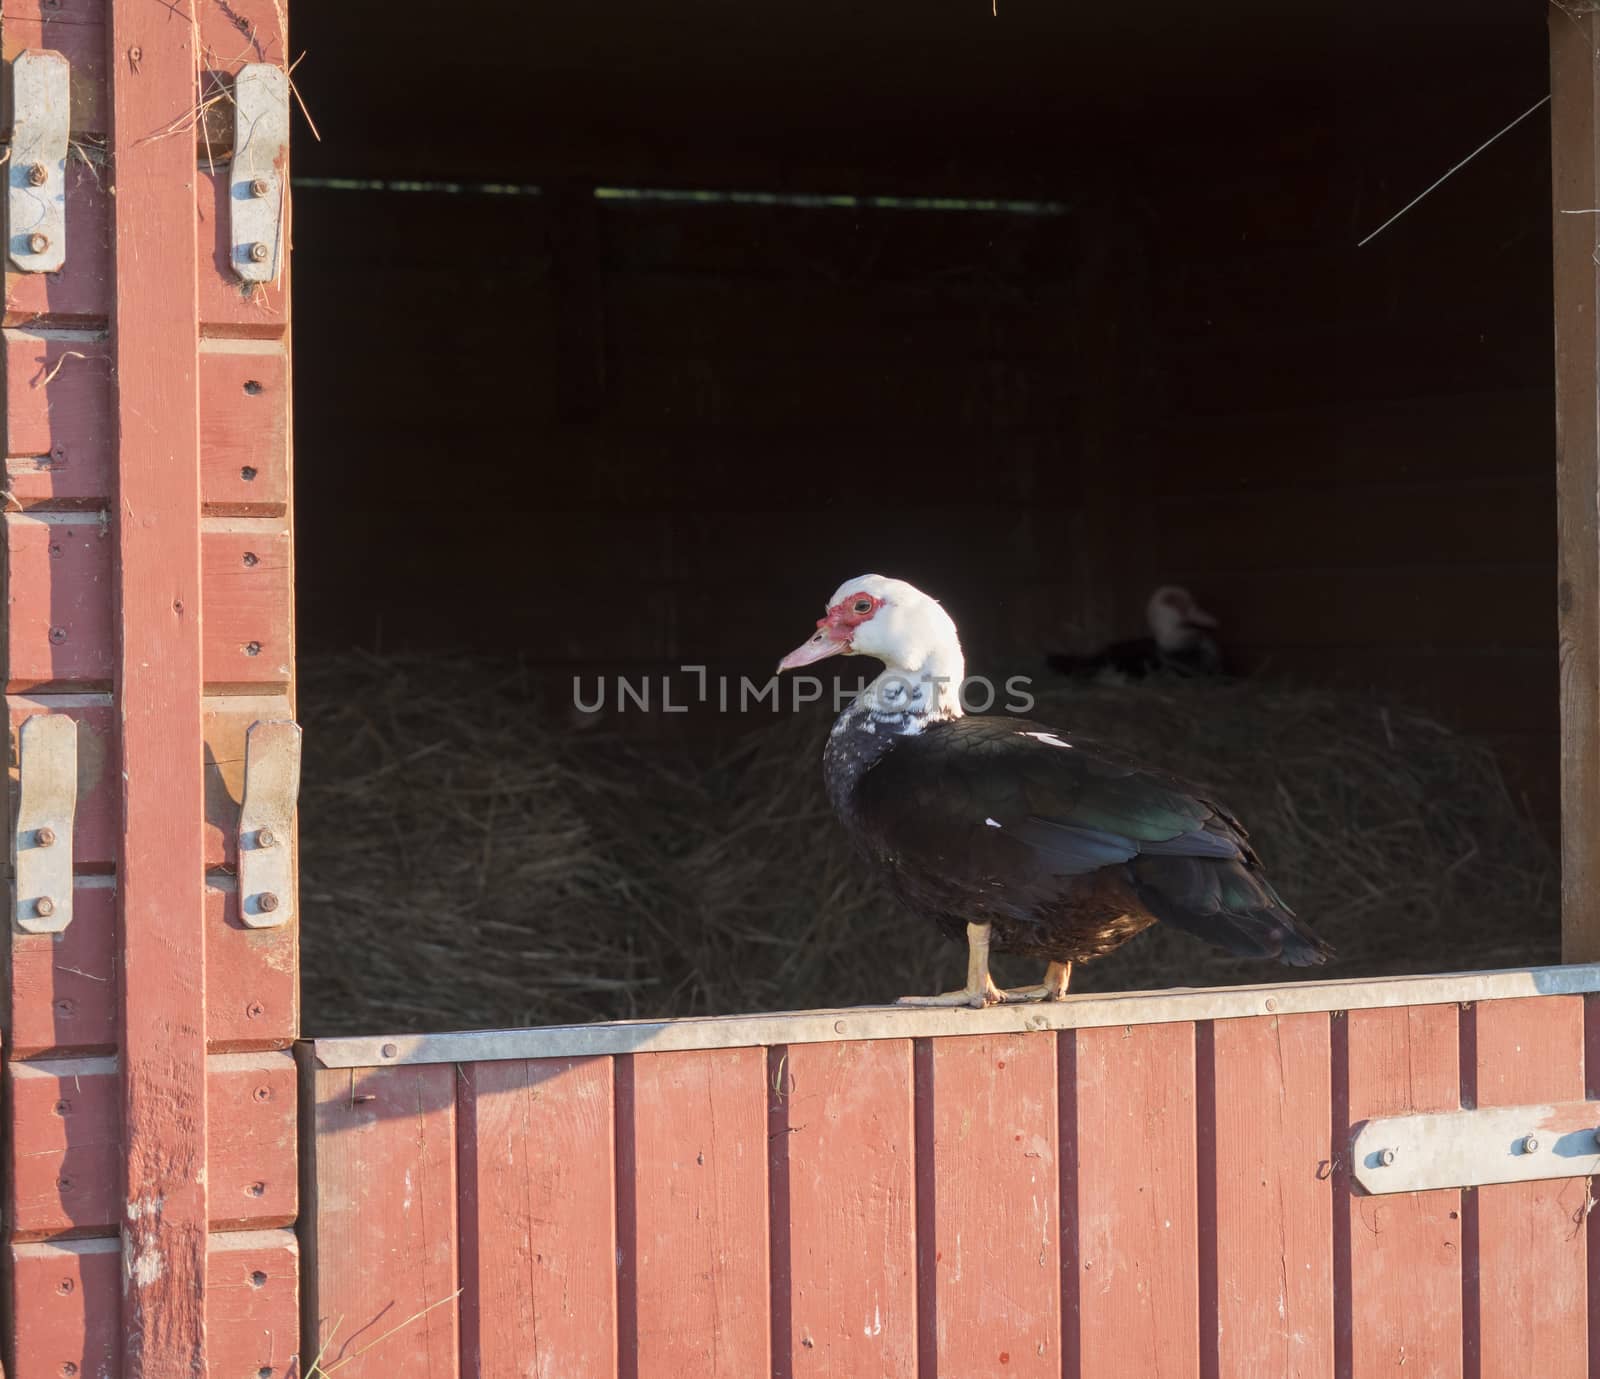 Muscovy duck Muscovy duck Cairina moschata standing on wooden orange stable window